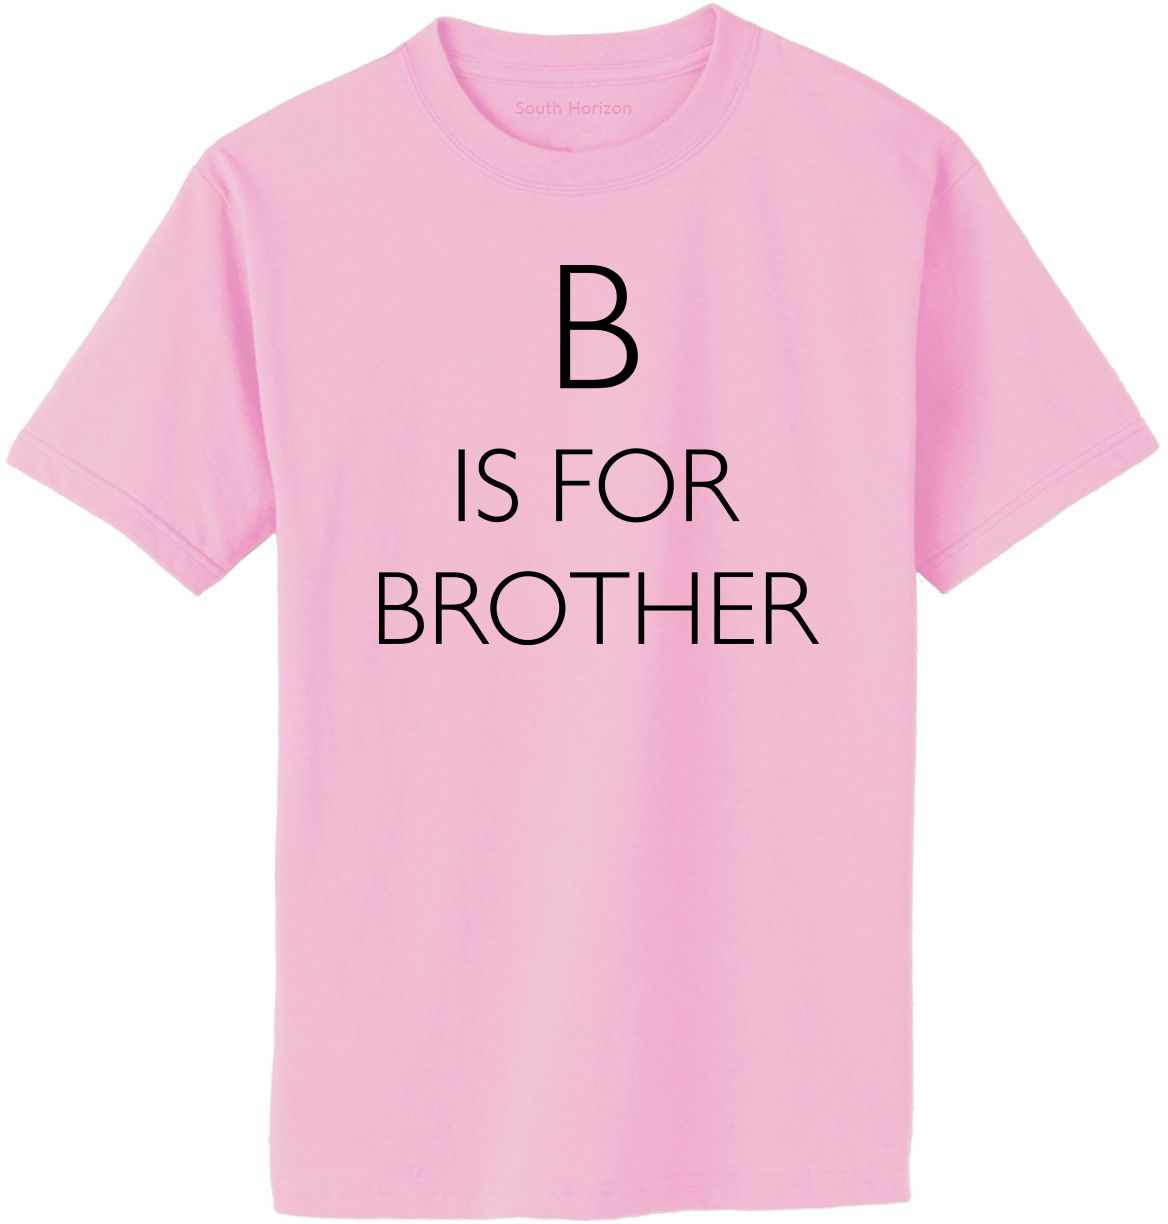 B is for Brother Adult T-Shirt (#1009-1)